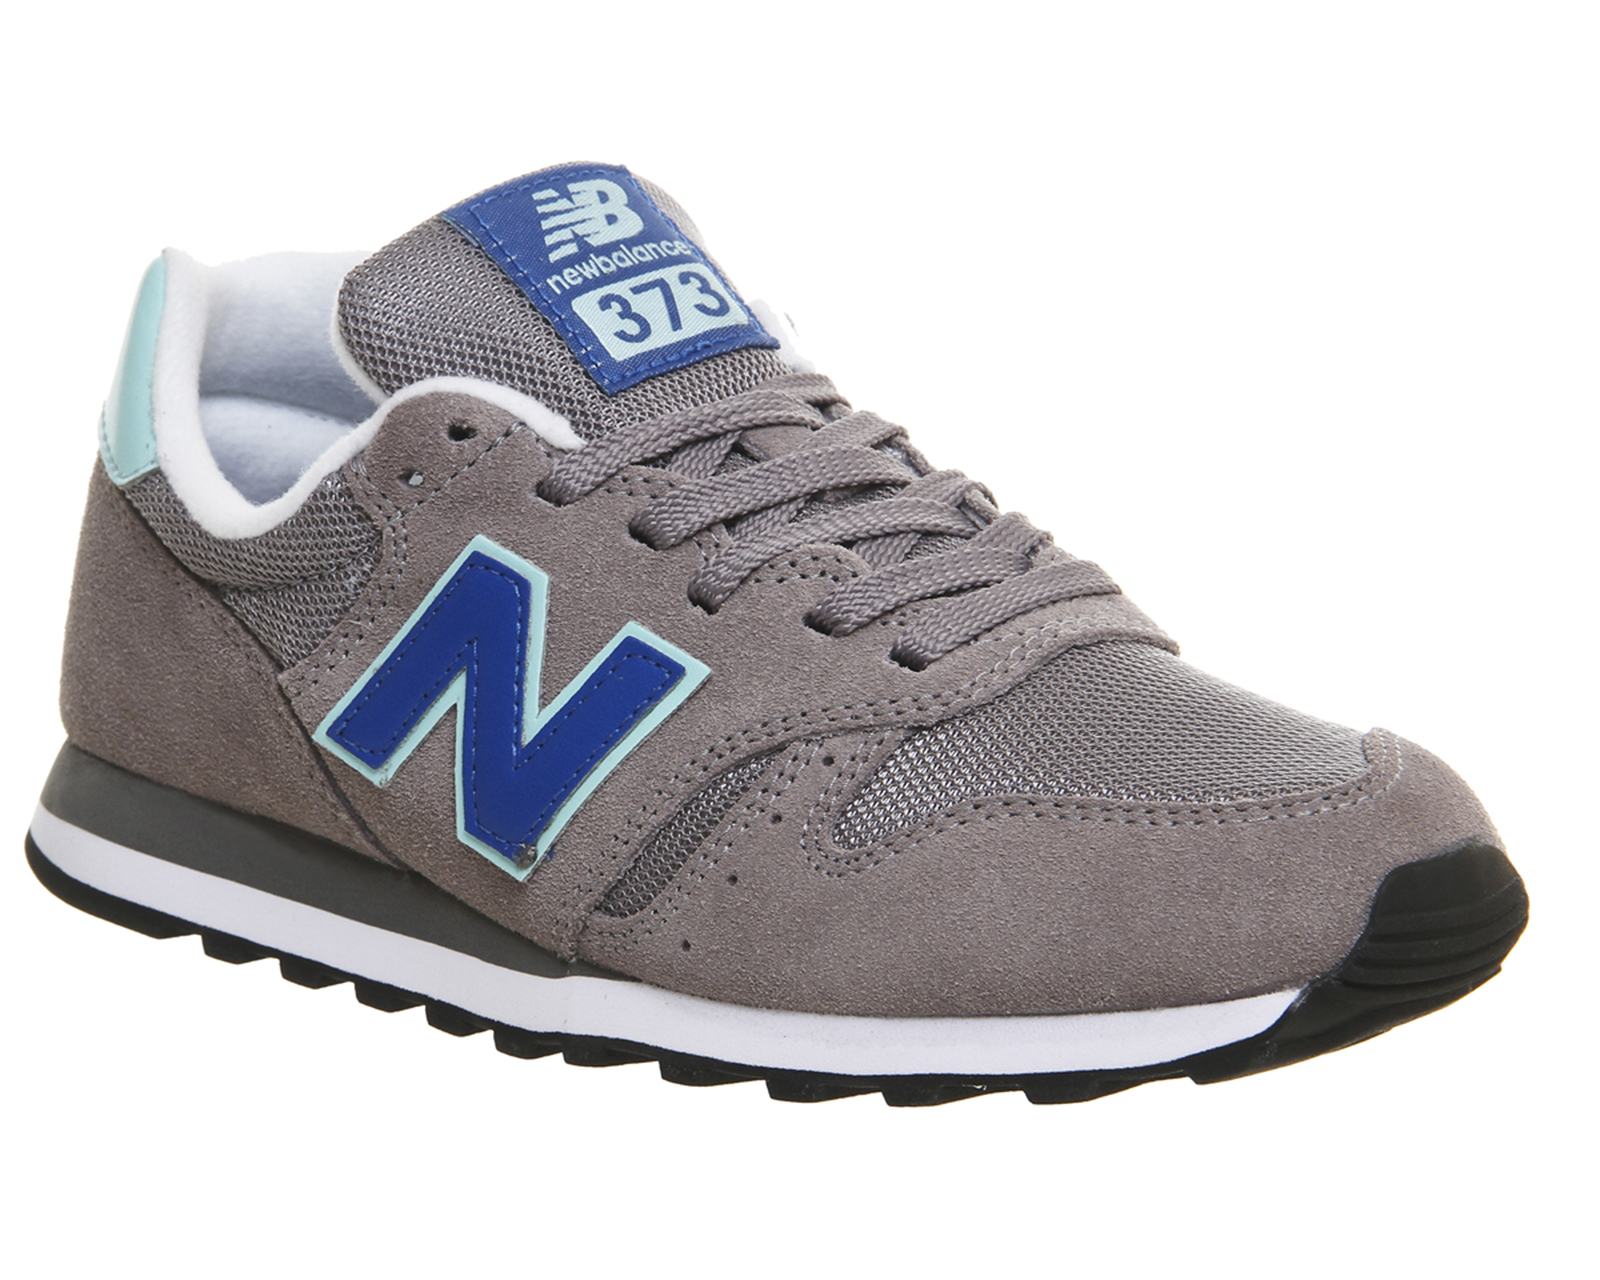 new balance 373 outlet